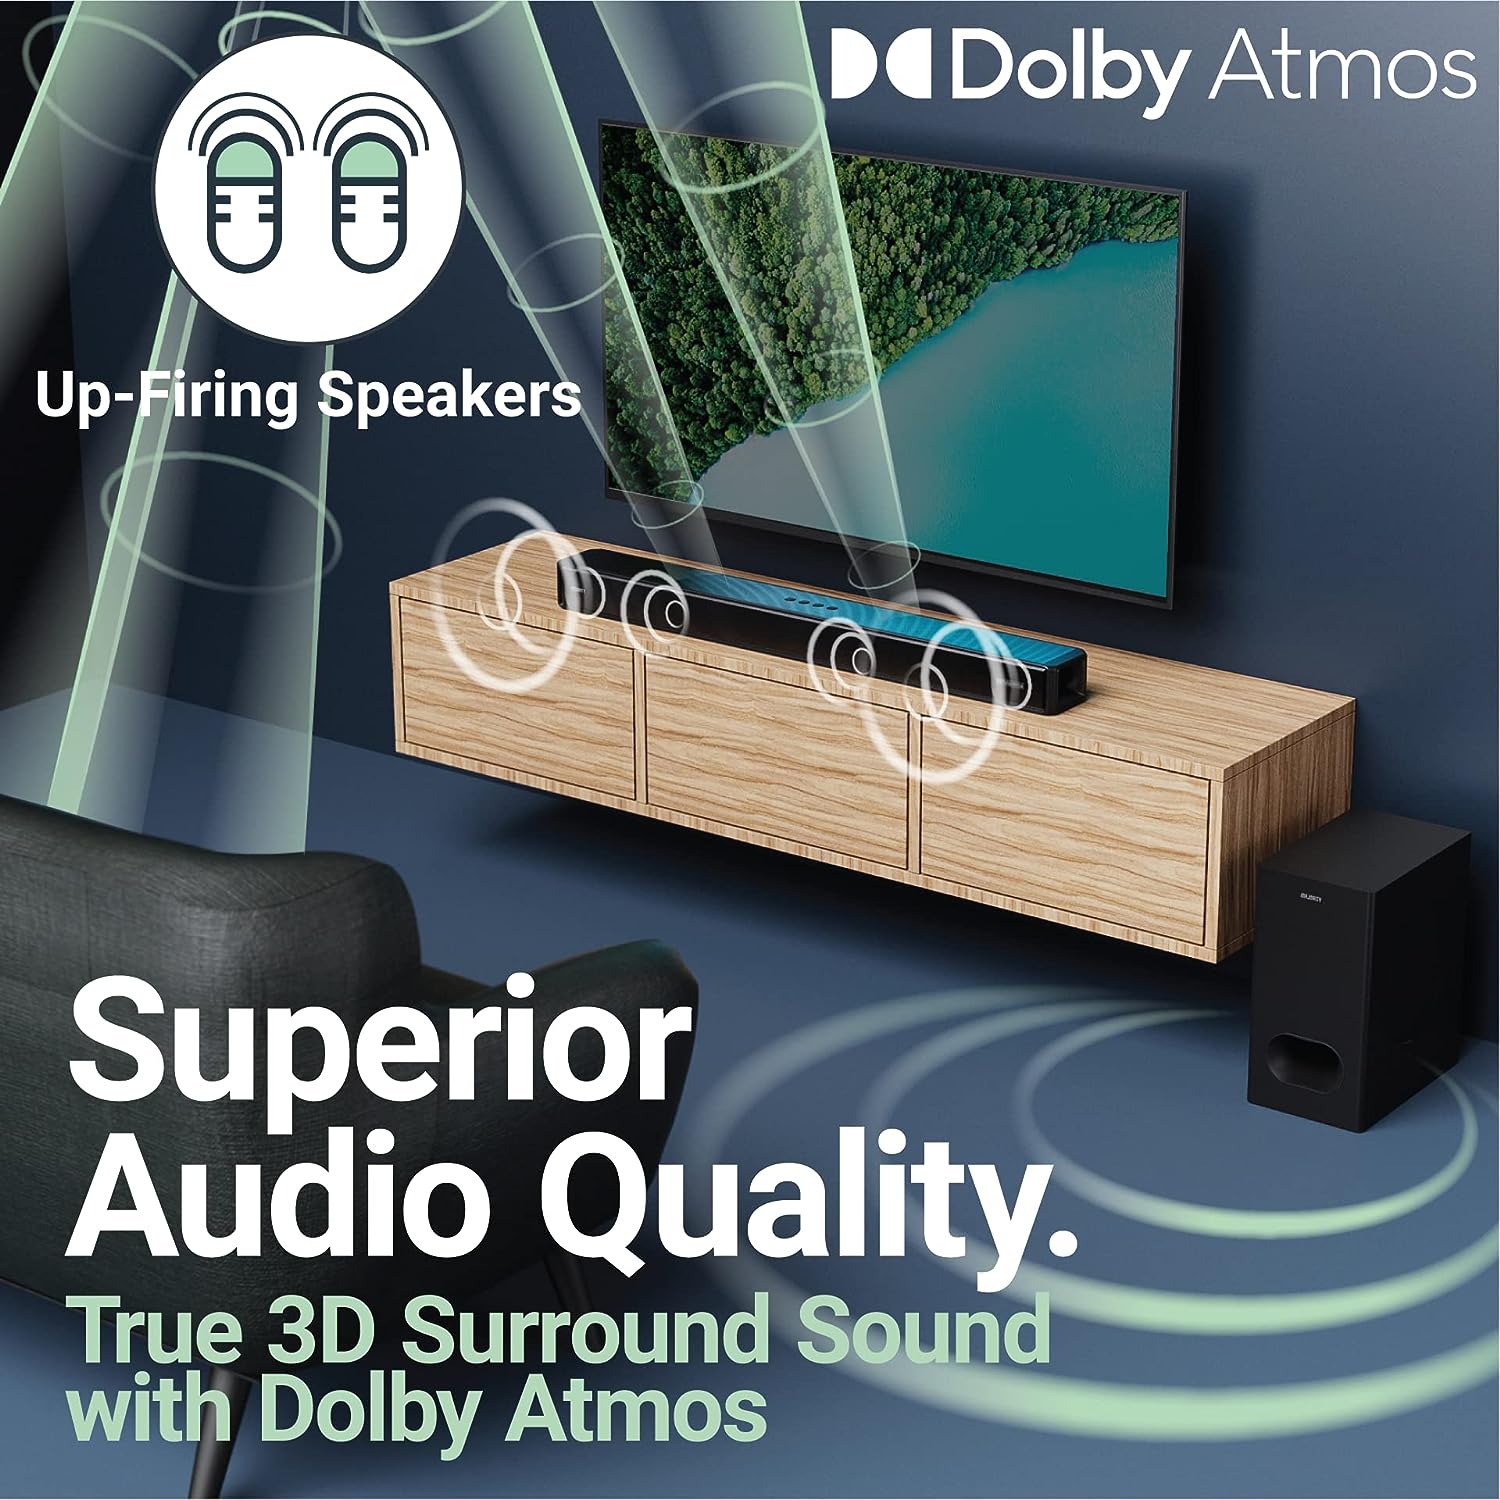 Majority Sierra 2.1.2 Dolby Atmos Soundbar with Wireless Subwoofer I 400W Powerful Sound Bar for TV | Home Theatre 3D Audio with Up-Firing Atmos Speakers | HDMI ARC, Bluetooth, USB AUX